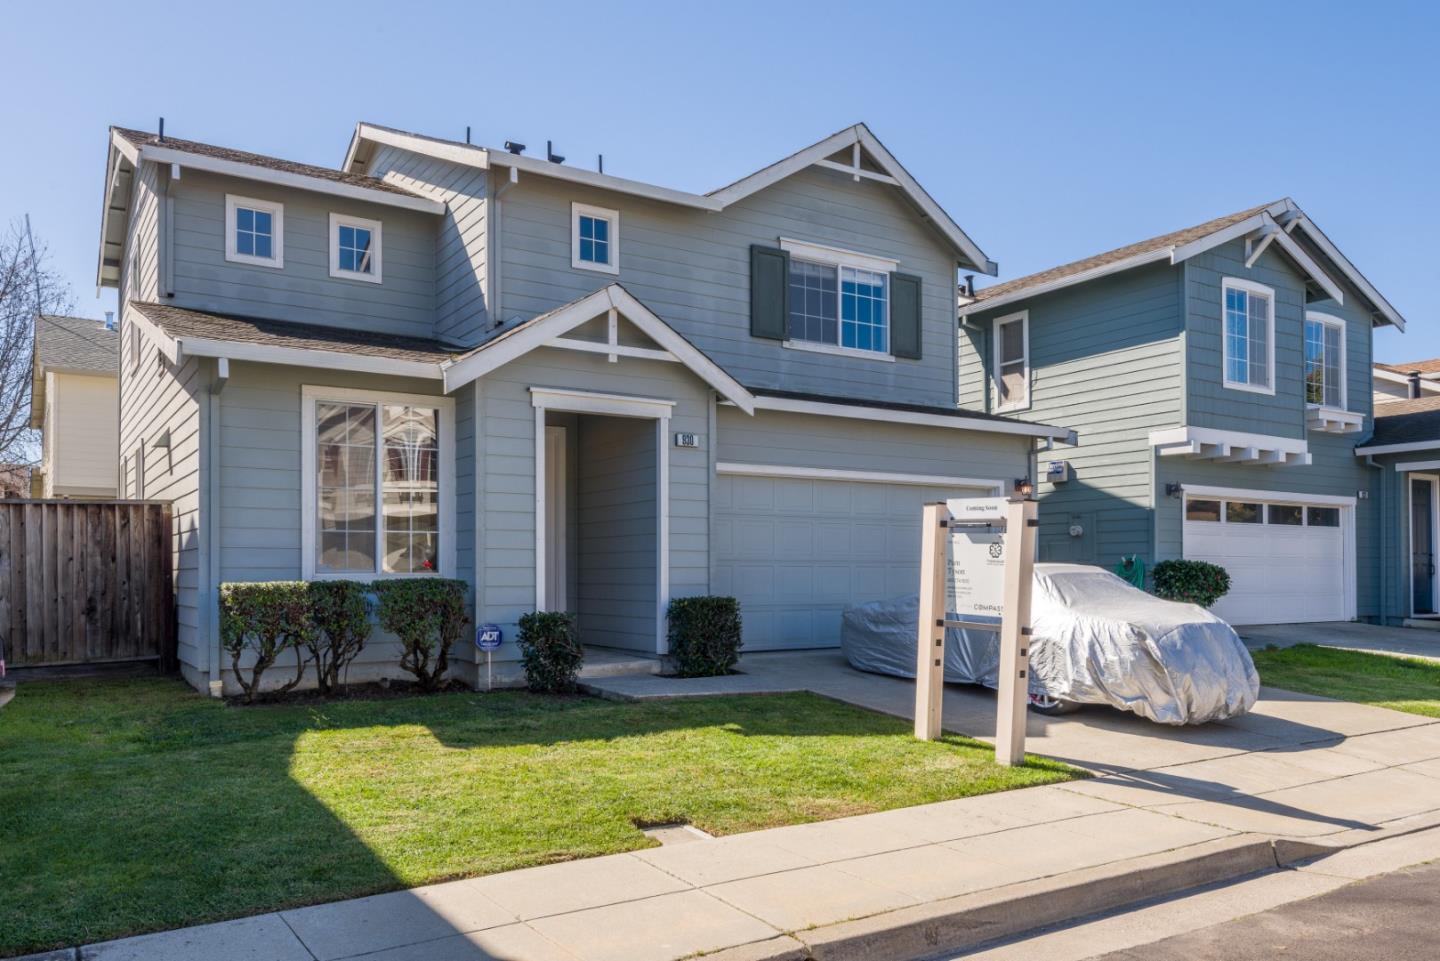 Photo of 930 Gates St in East Palo Alto, CA